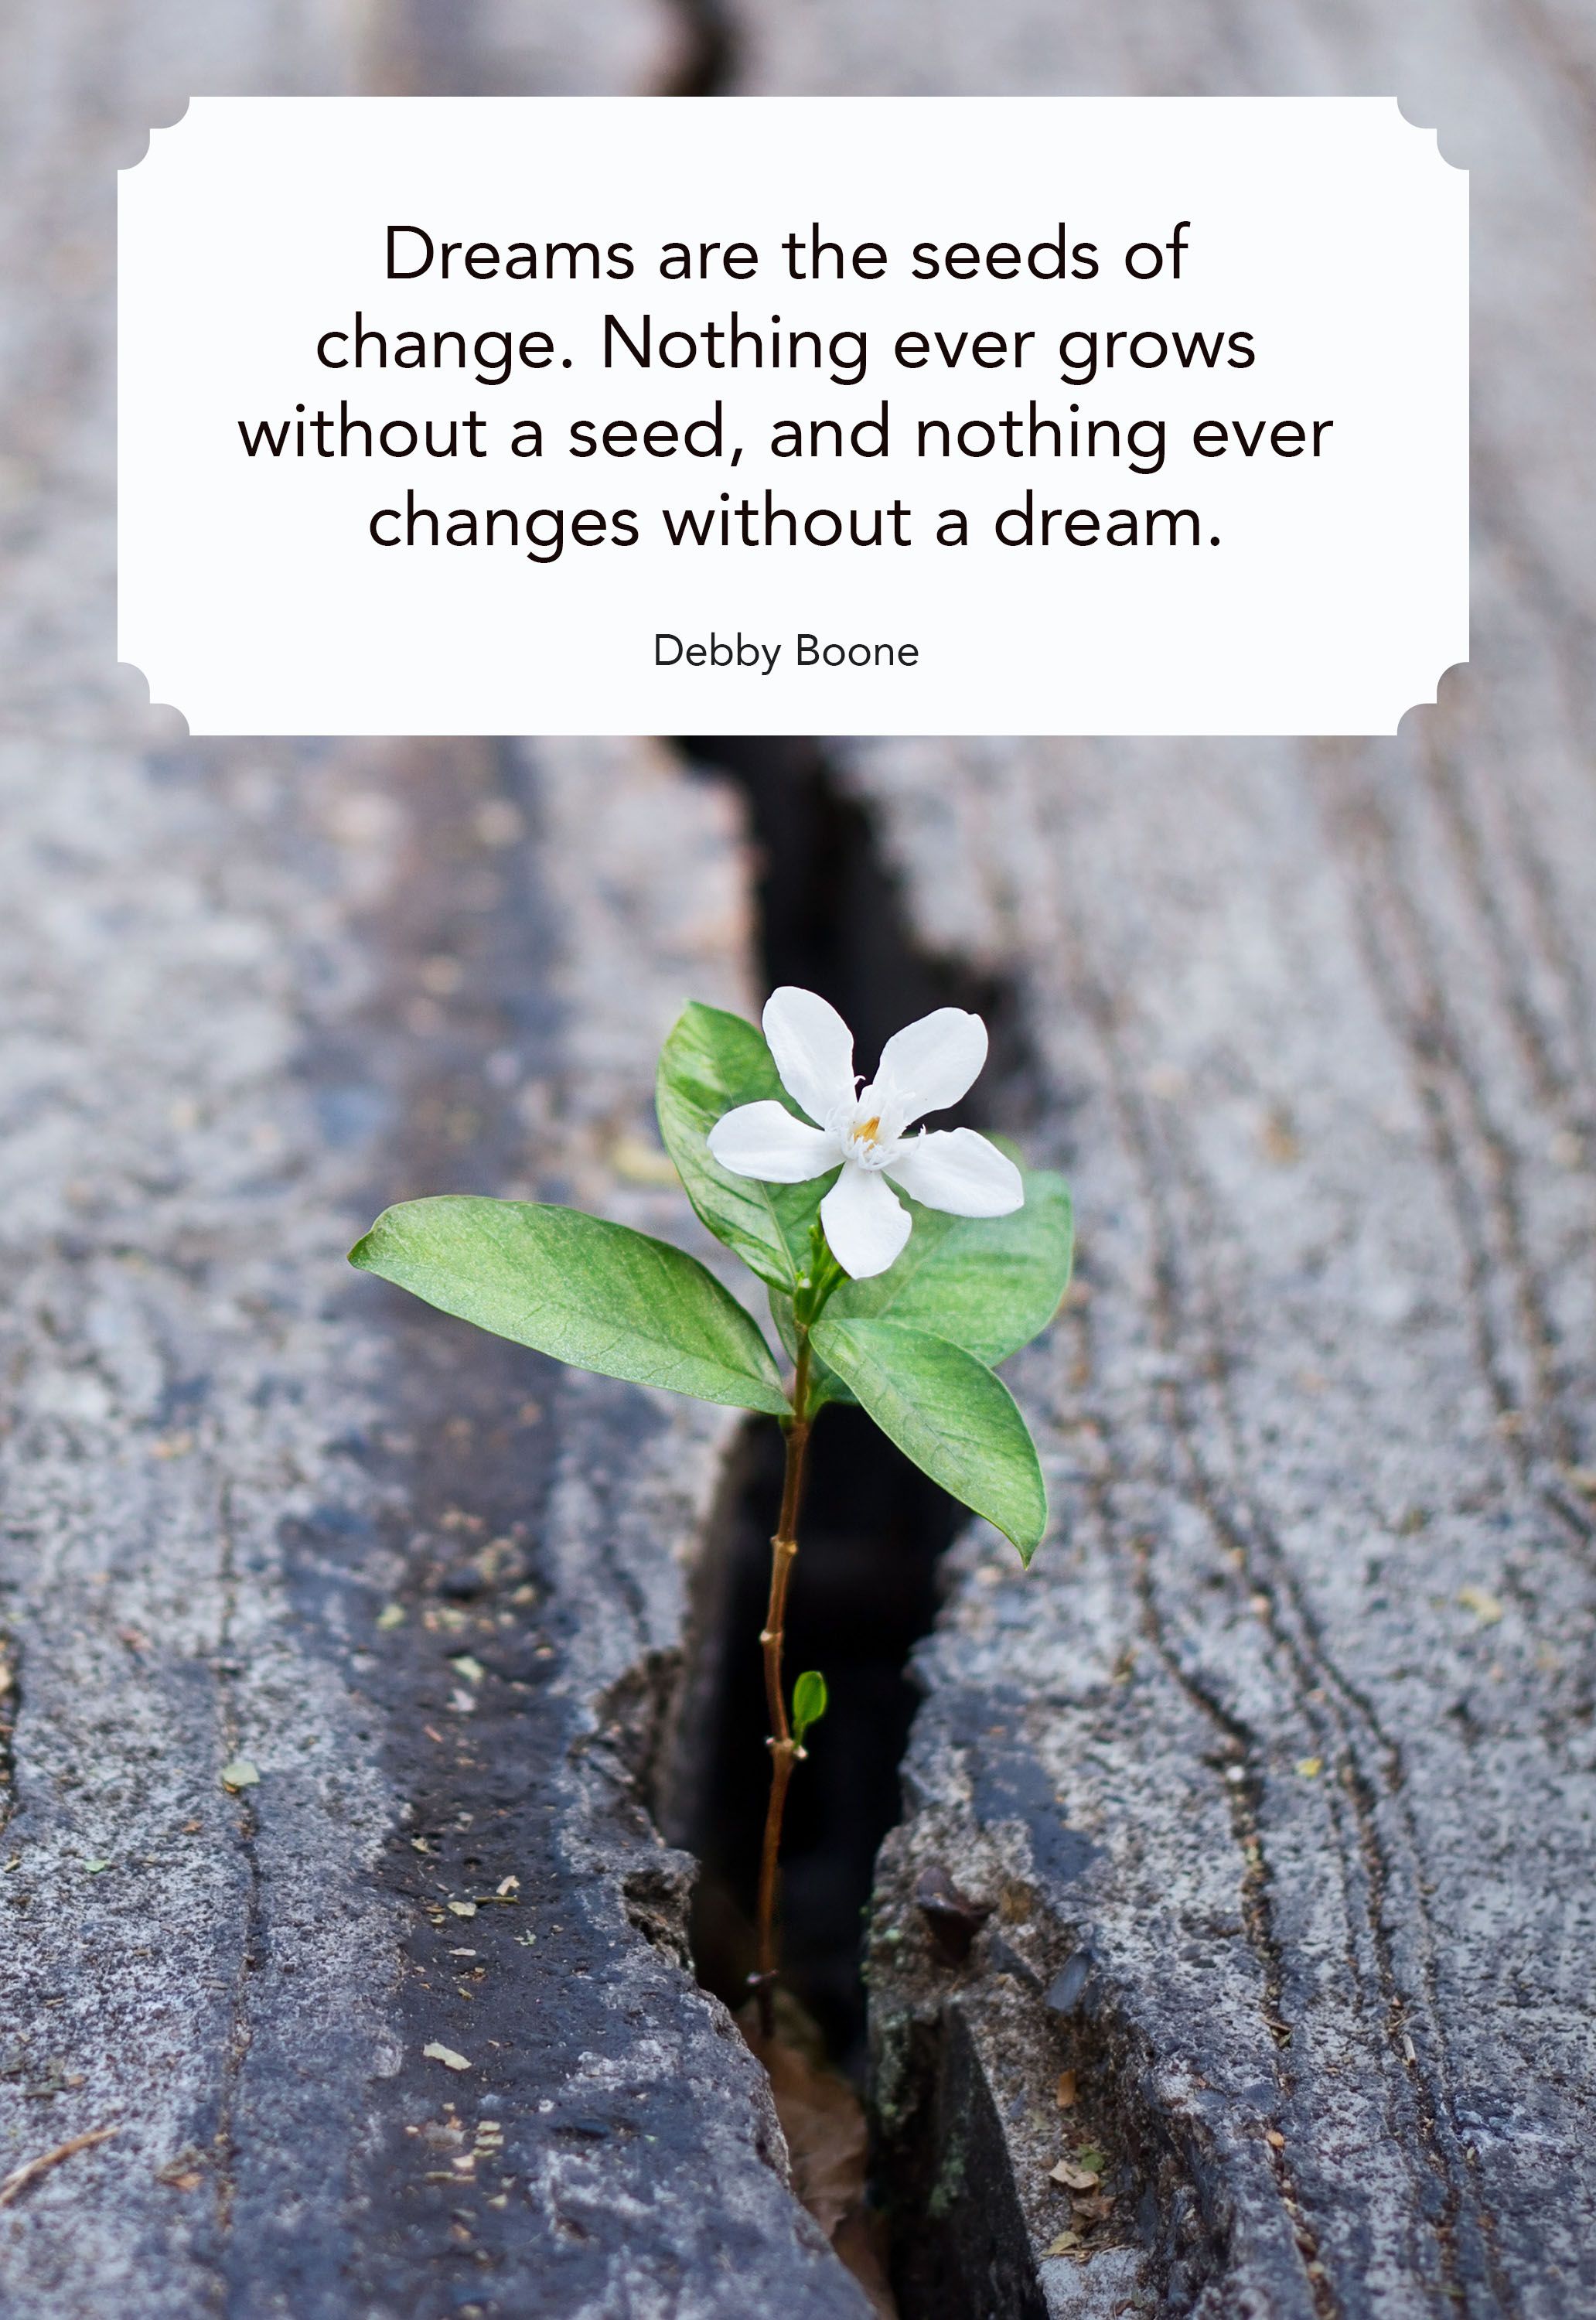 life-changes-quotes-seeds-of-change-1543619244.jpg